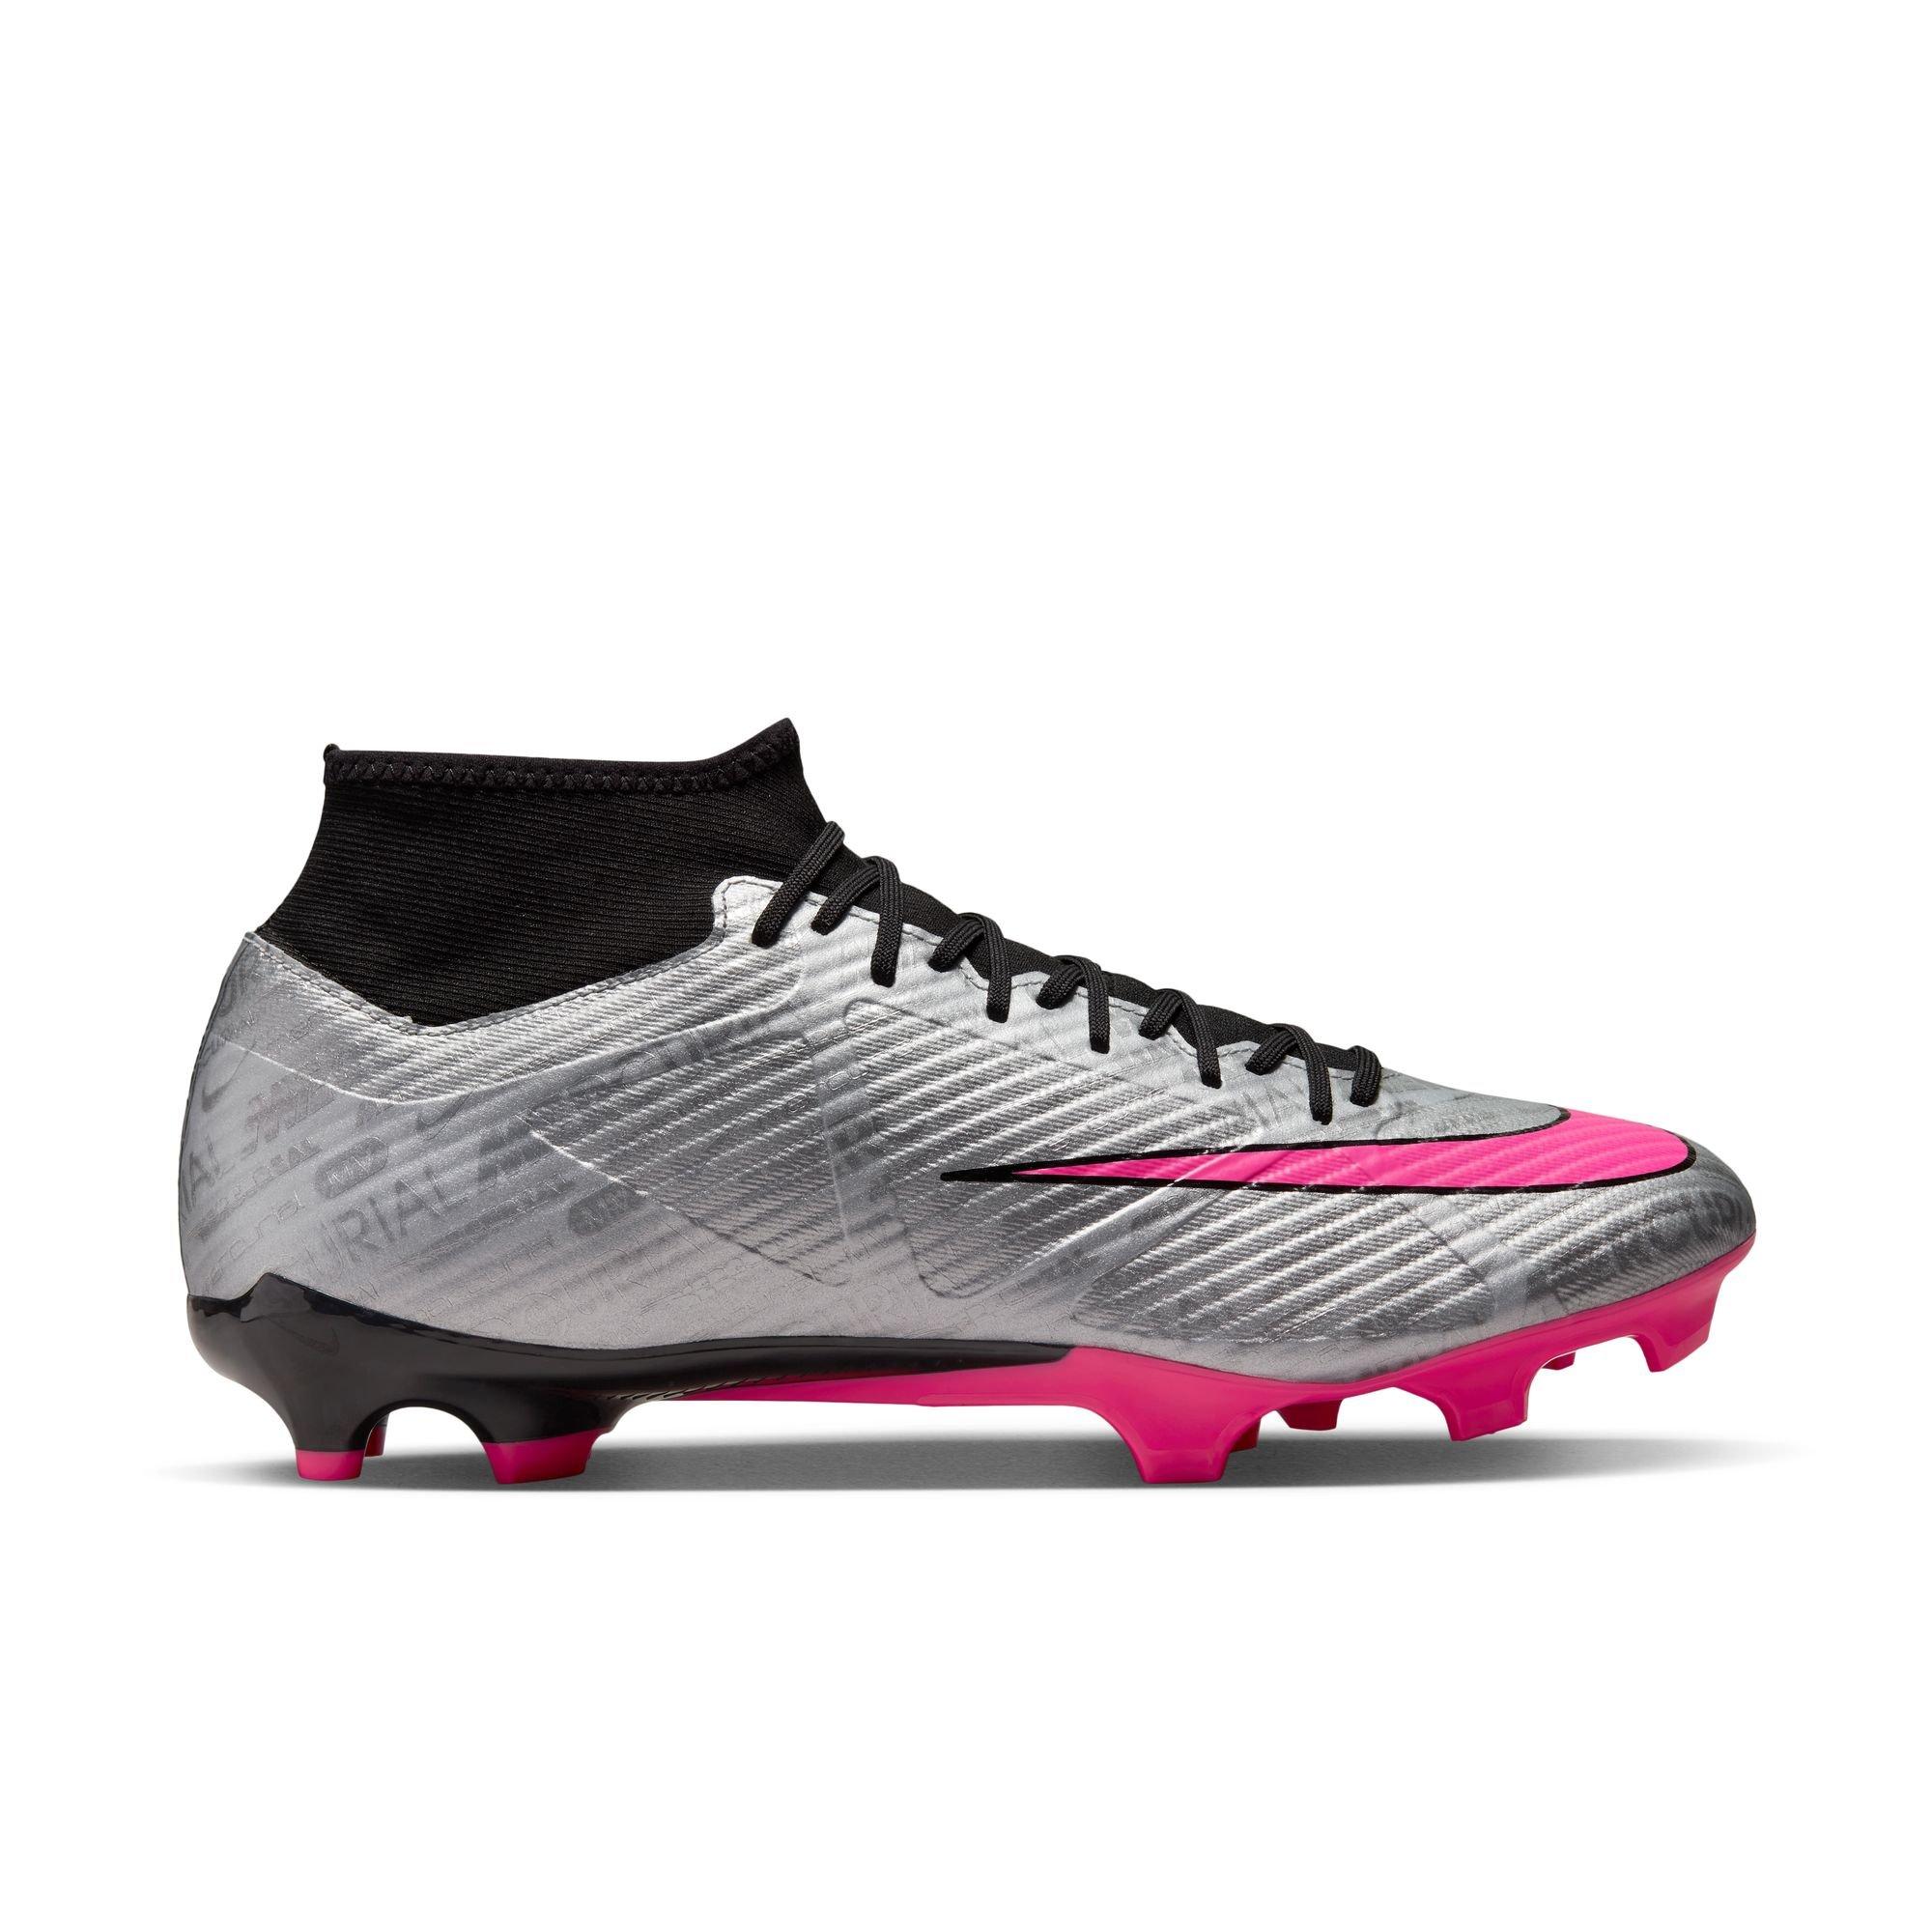 Nike Zoom Superfly 9 Academy XXV MG "Metallic Silver/Hyper Pink" Men's Soccer Cleat